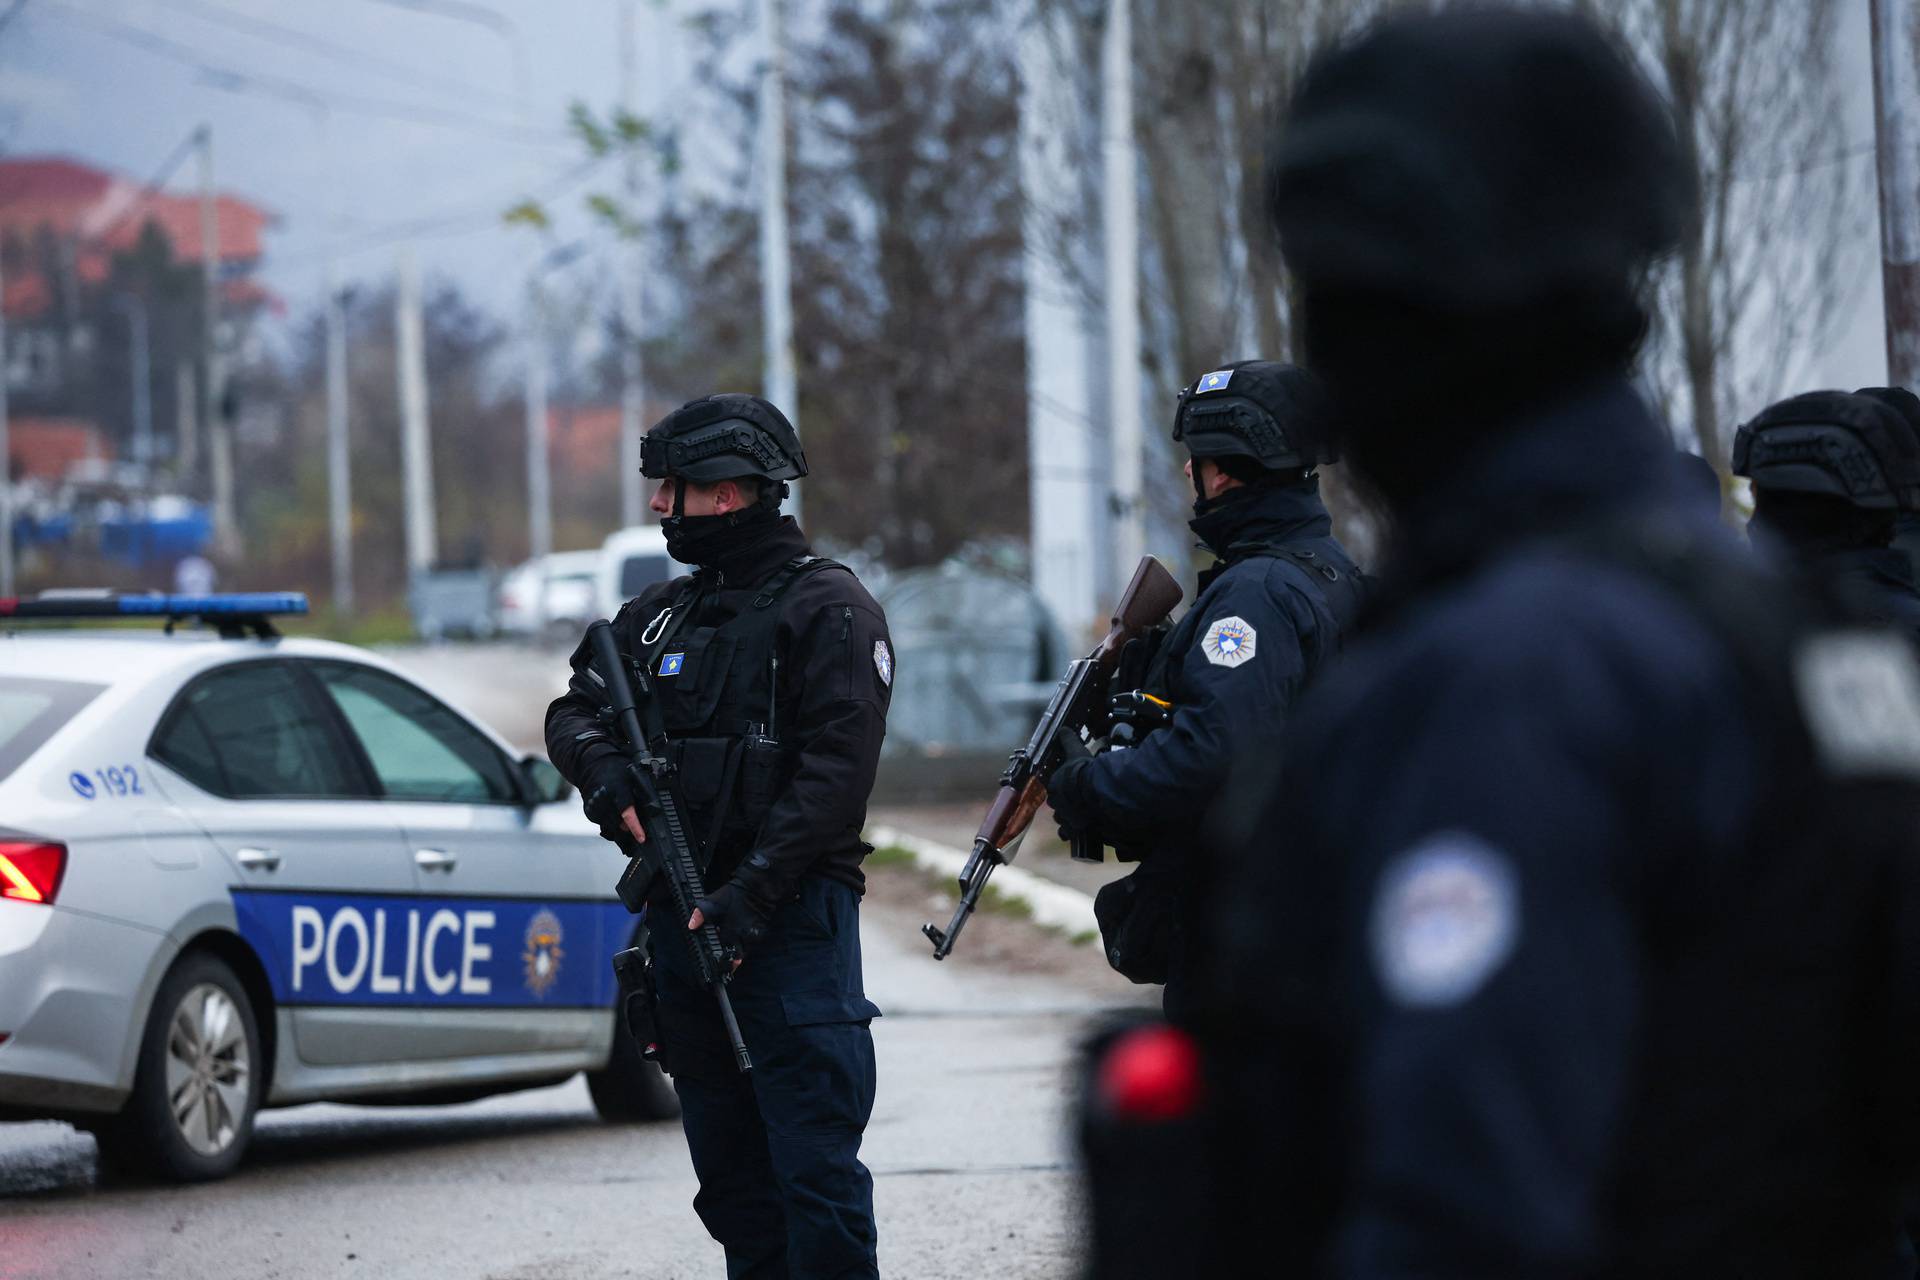 Kosovo police officers patrol an area in the northern part of the ethnically-divided town of Mitrovica